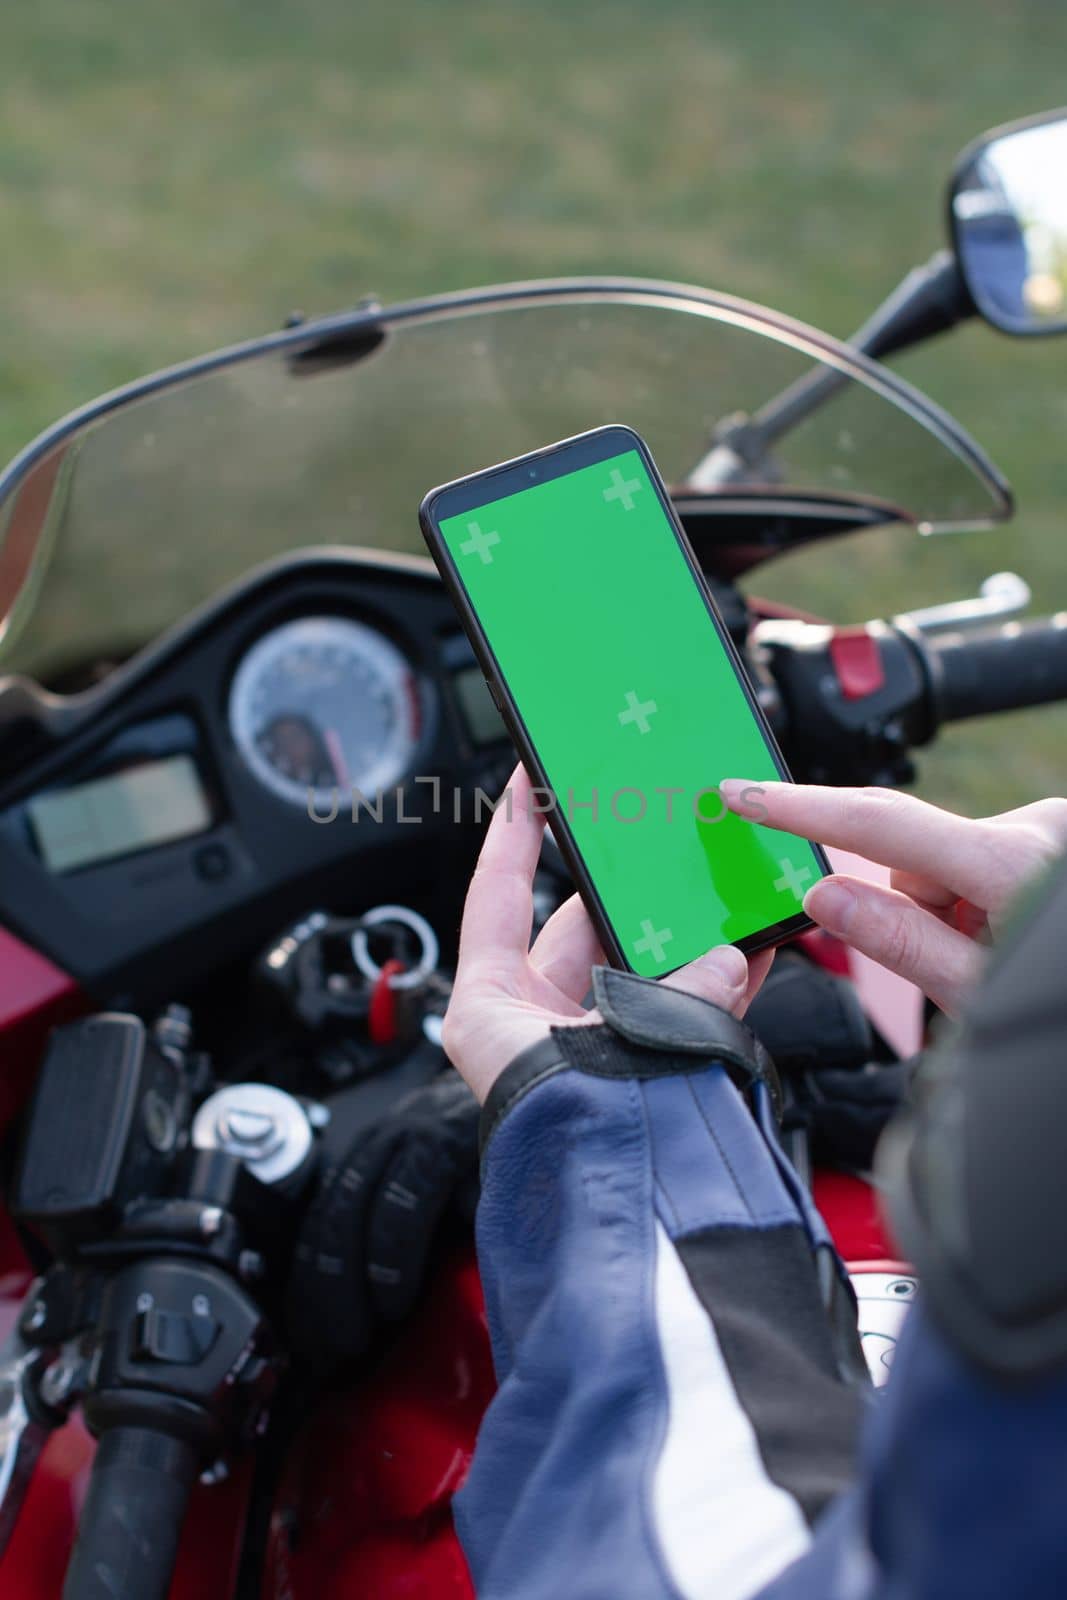 biker girl on a motorcycle enjoys a navigator in a mobile phone by KaterinaDalemans